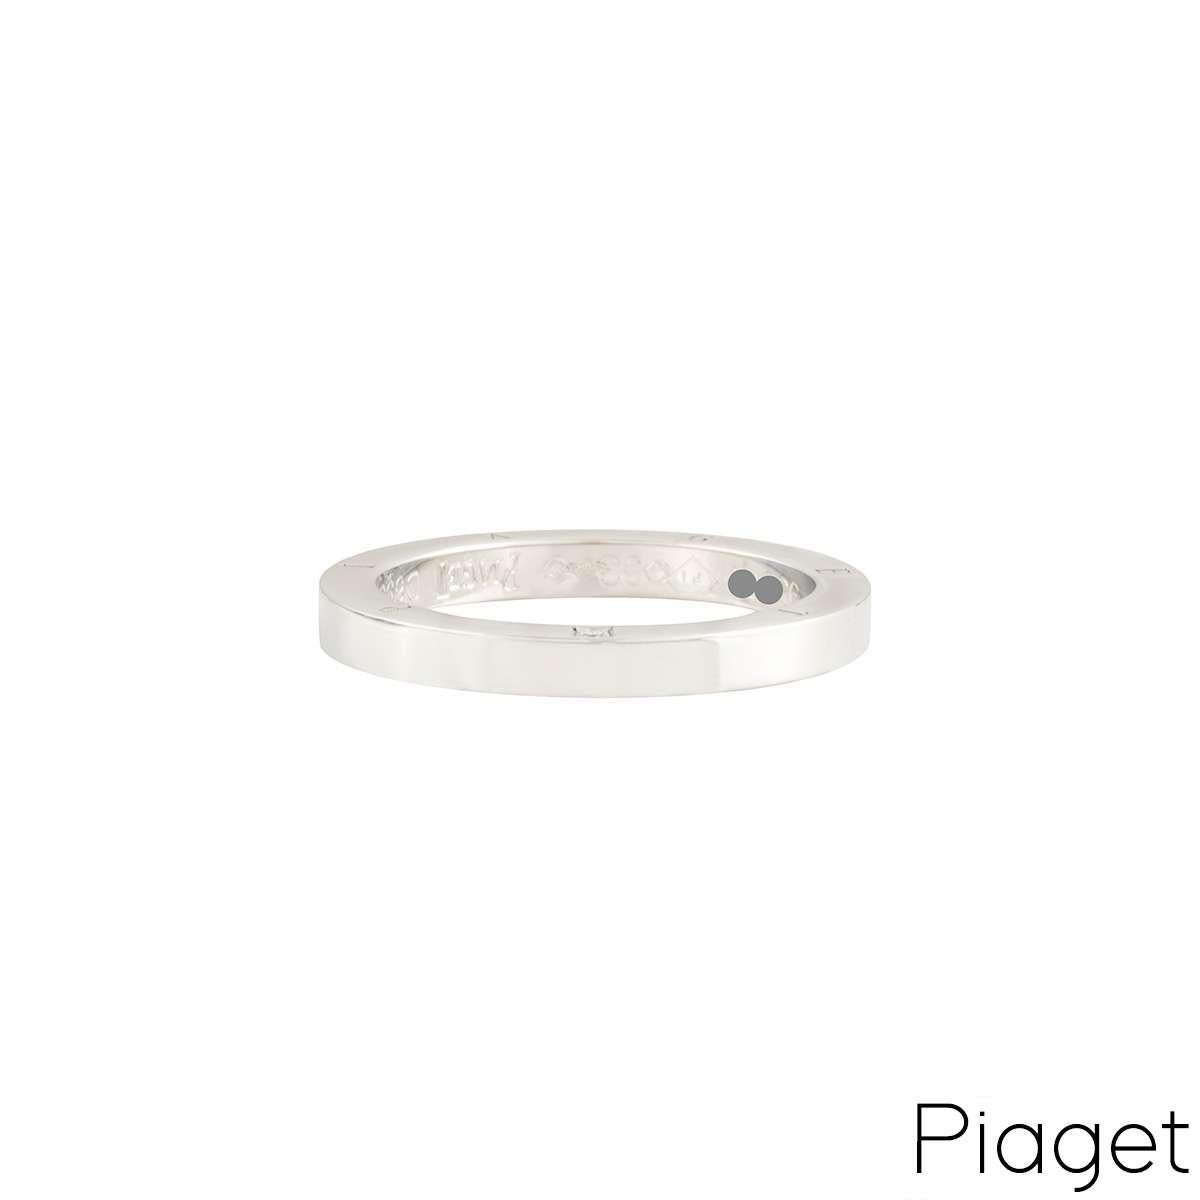 A diamond set wedding band by Piaget. The band has a smooth polished finish to the front, complemented with a single round brilliant cut diamond and Piaget logo engraved to one side of the outer edge. The ring is 2.5mm wide and is a size UK N - EU